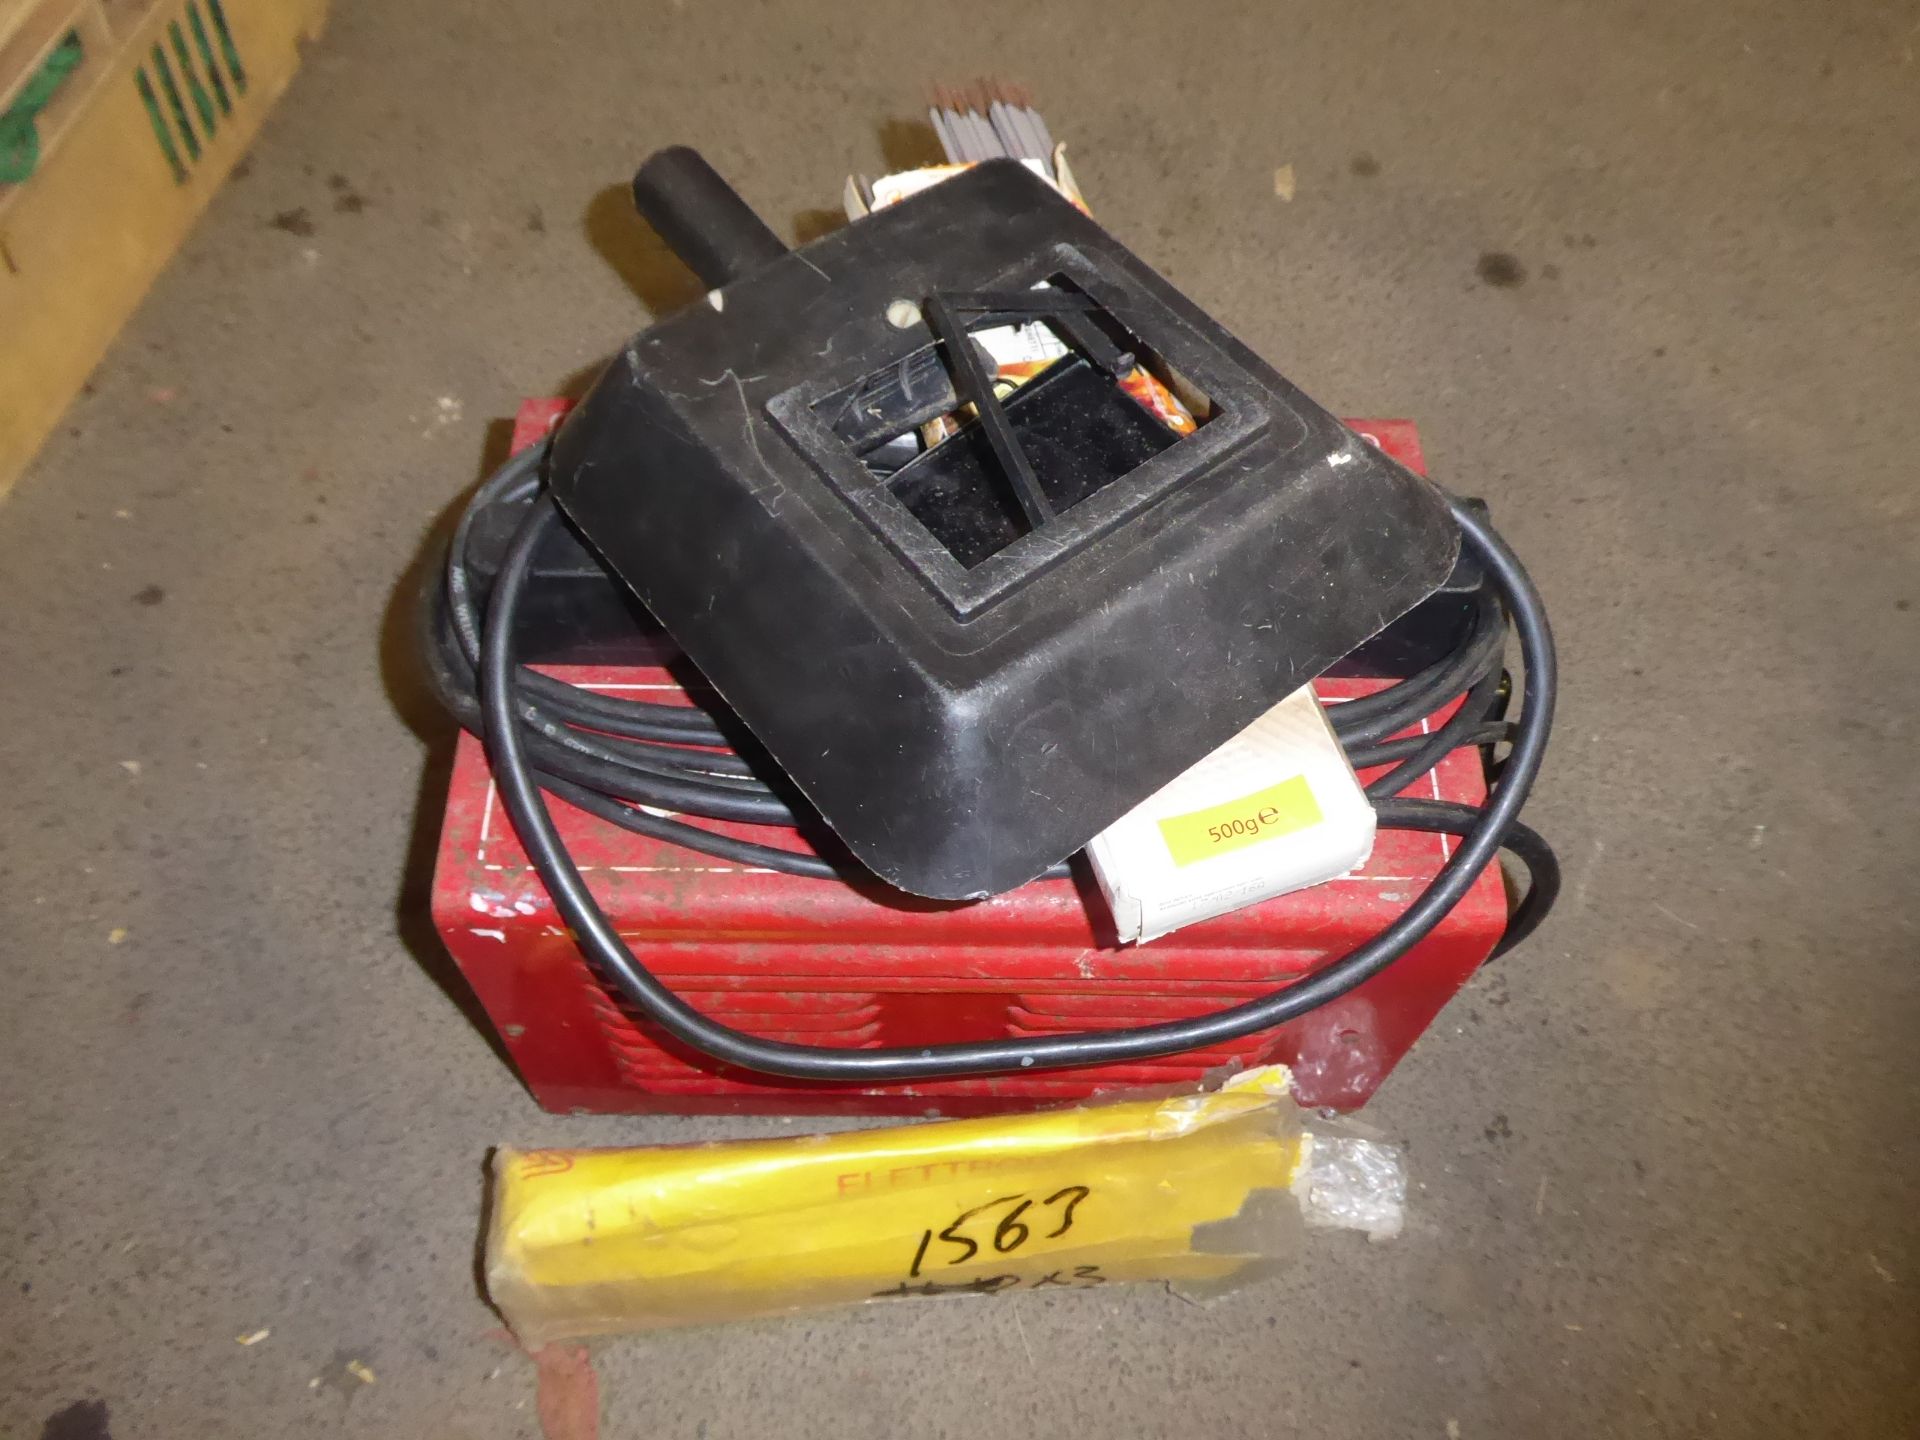 Arc welder, SIP Weldmate 140 with selection of welding rods, mask and chipping hammer, wo